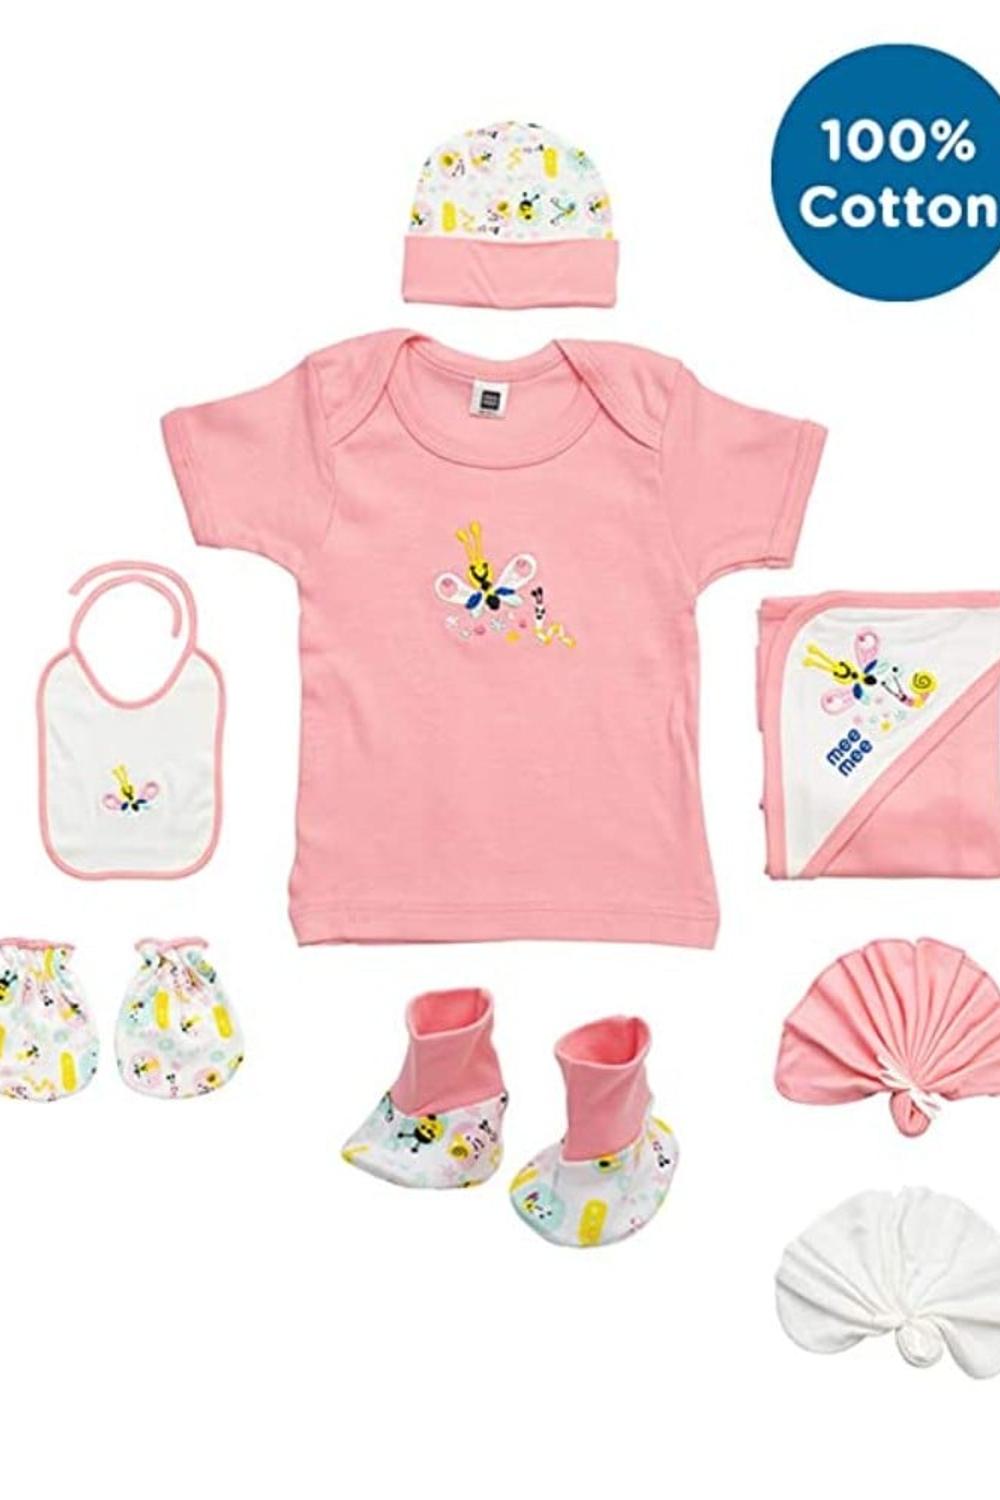 Mee Mee Soft Cotton New Born Baby Gift Clothes Set for Baby Boys, Baby Girls (9 Pieces, Pink)